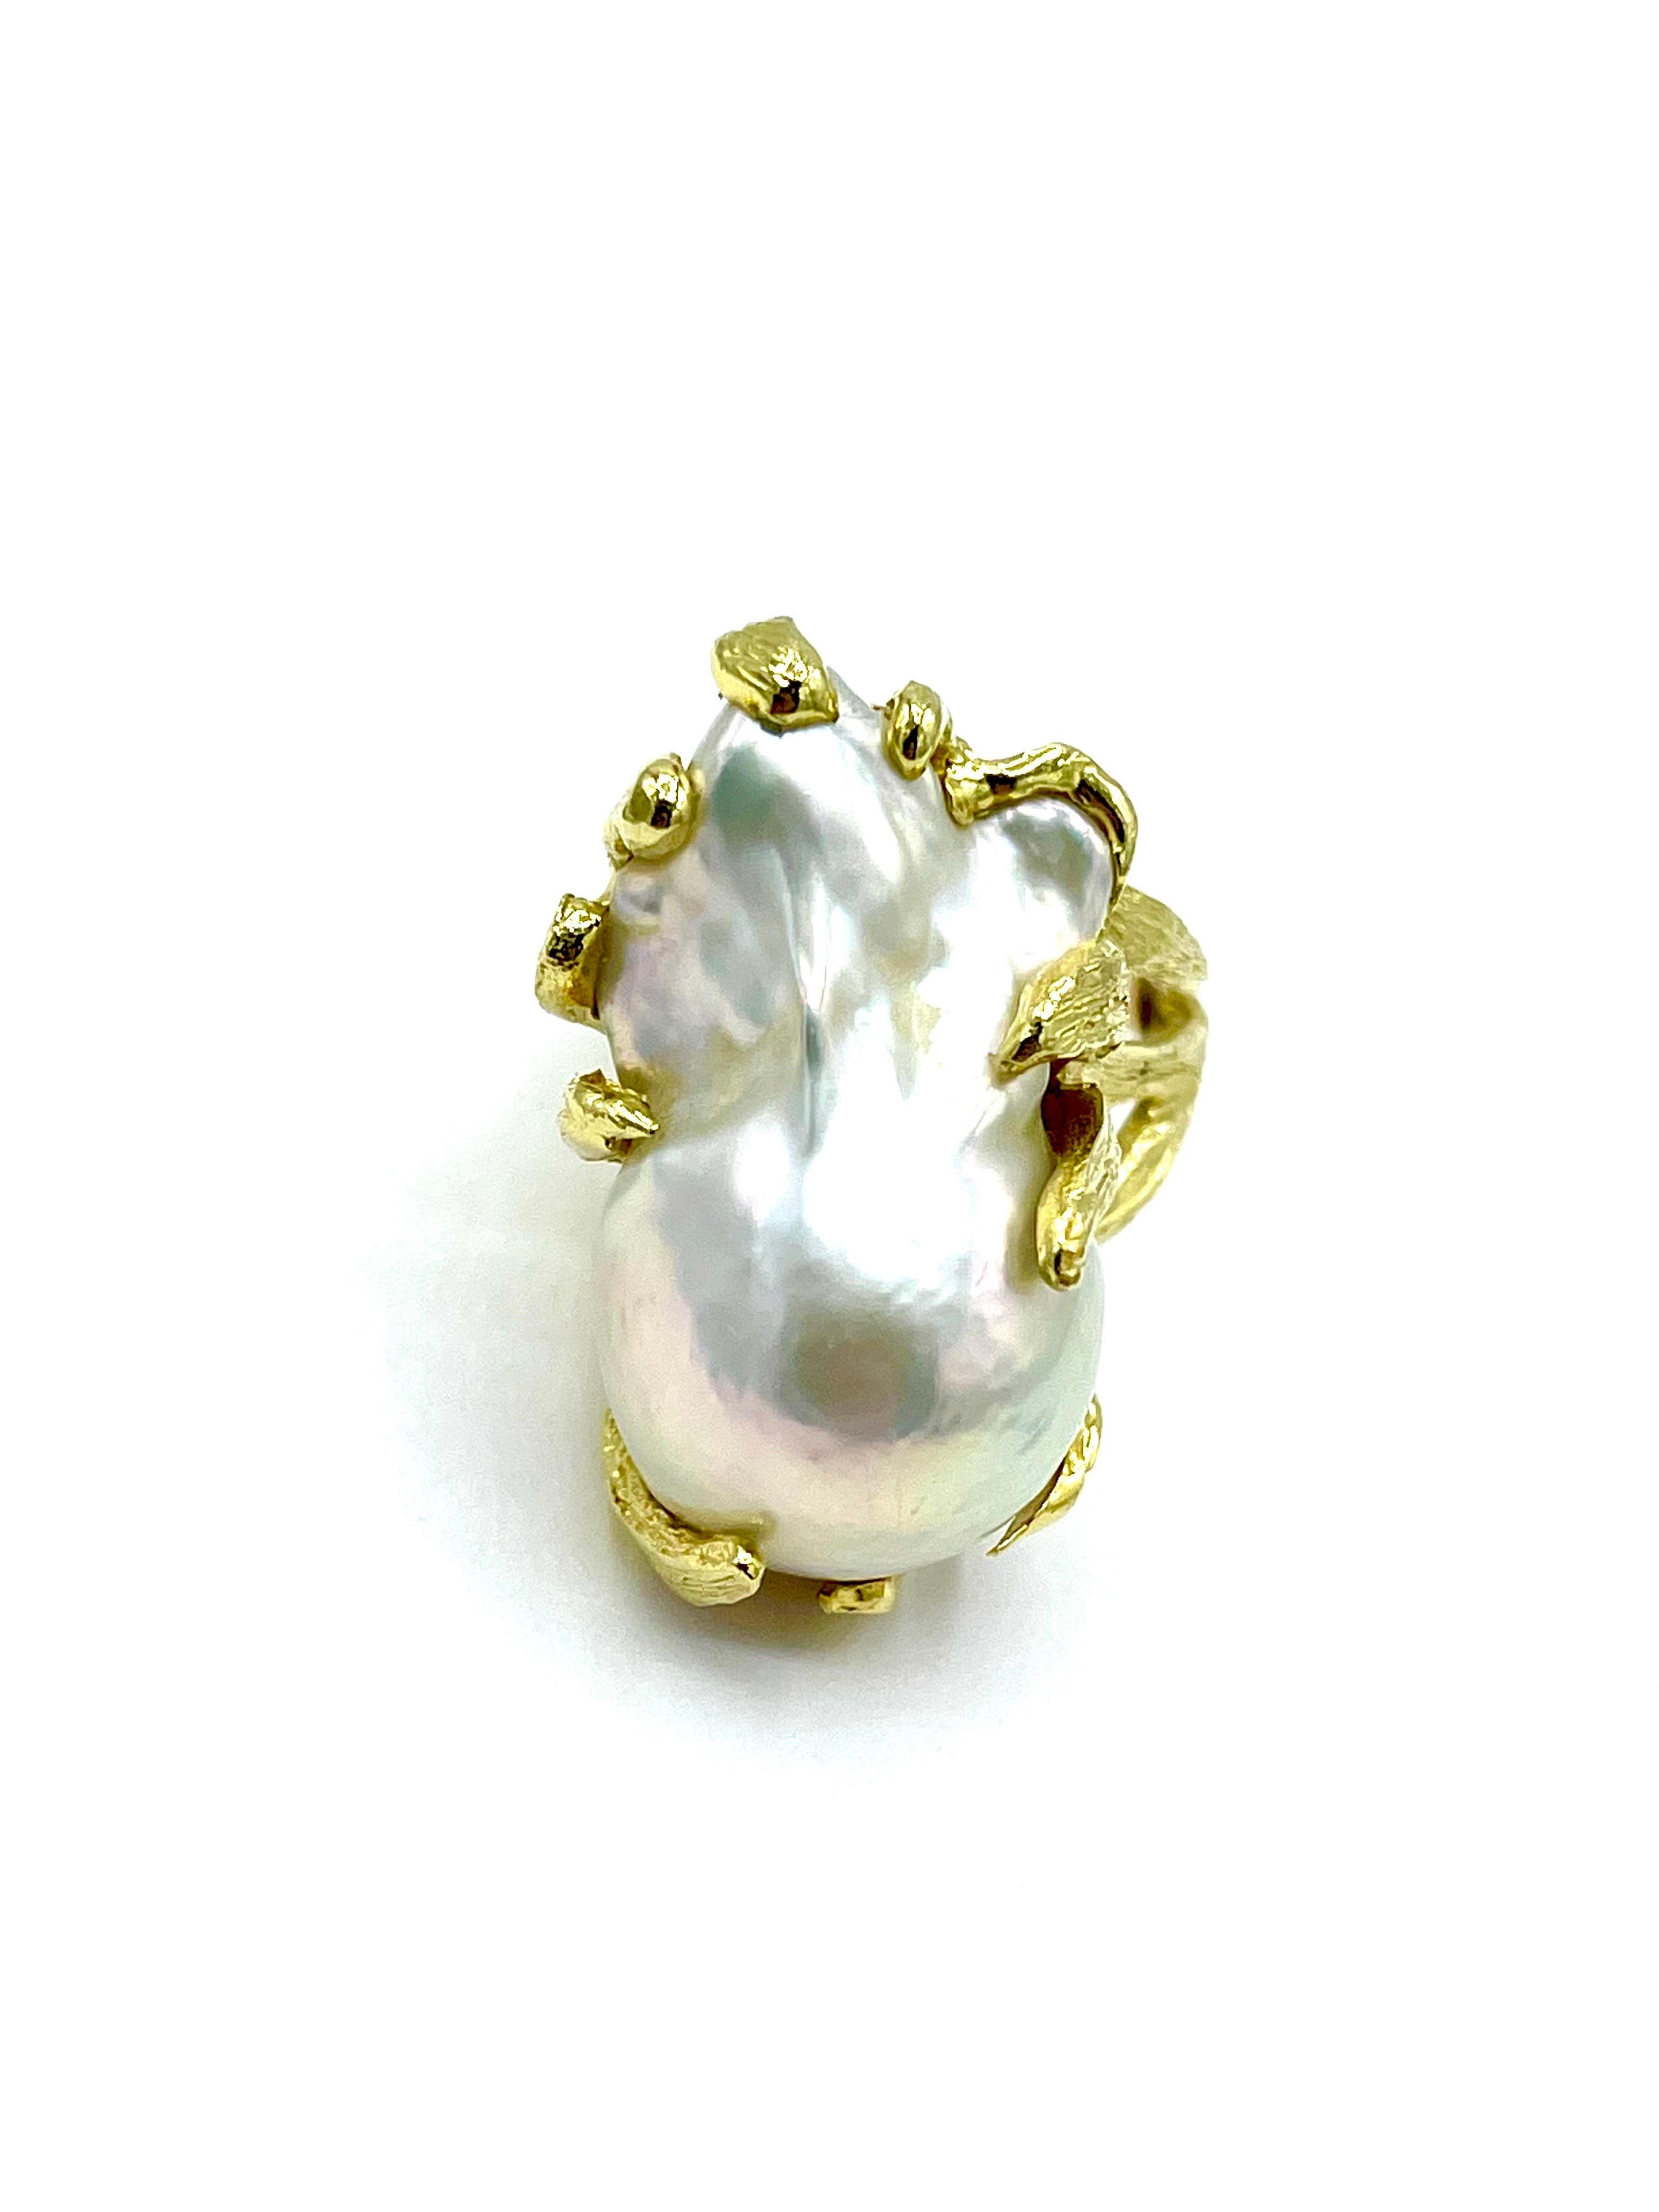 A wonderful Tanya Farah Pearl fashion ring.  The 28.50mm x 15.40mm baroque pearl is set in textured sea grass 18k yellow gold, with a split shank.  The Pearl has tremendous luster and sheen to it.  The ring is currently a size 6.50, and can be sized